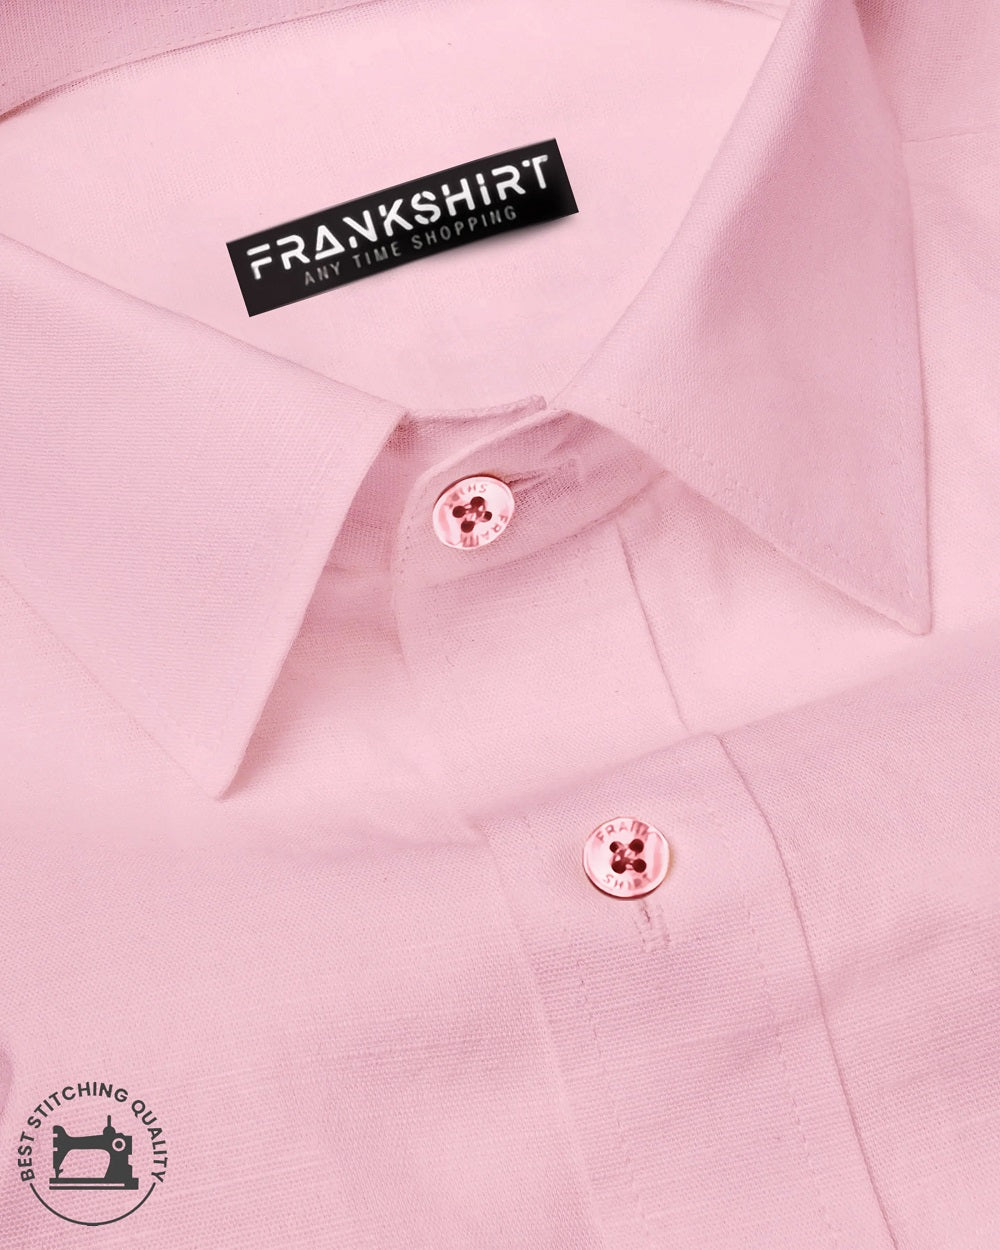 Pack of 2 Cotton Shirt for Man (Light Pink and Dark Grey)